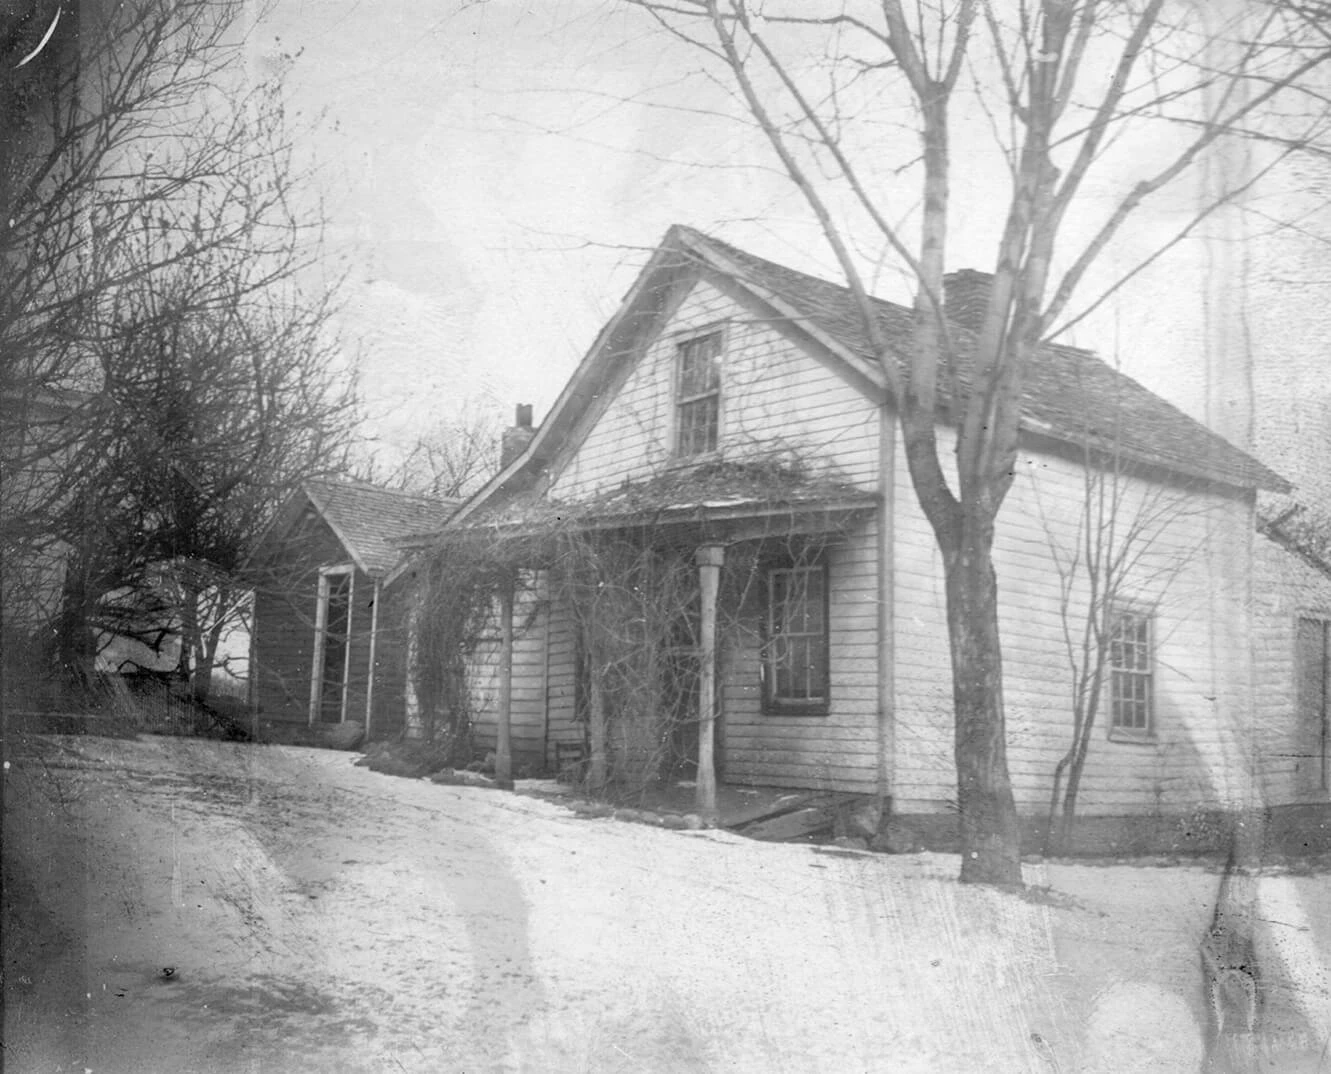 Black and white photo of the Horatio Petit house. The porch is covered in vines, and a tree stands in the front corner of the yard. It appears to have been taken in winter, with snow on the ground.